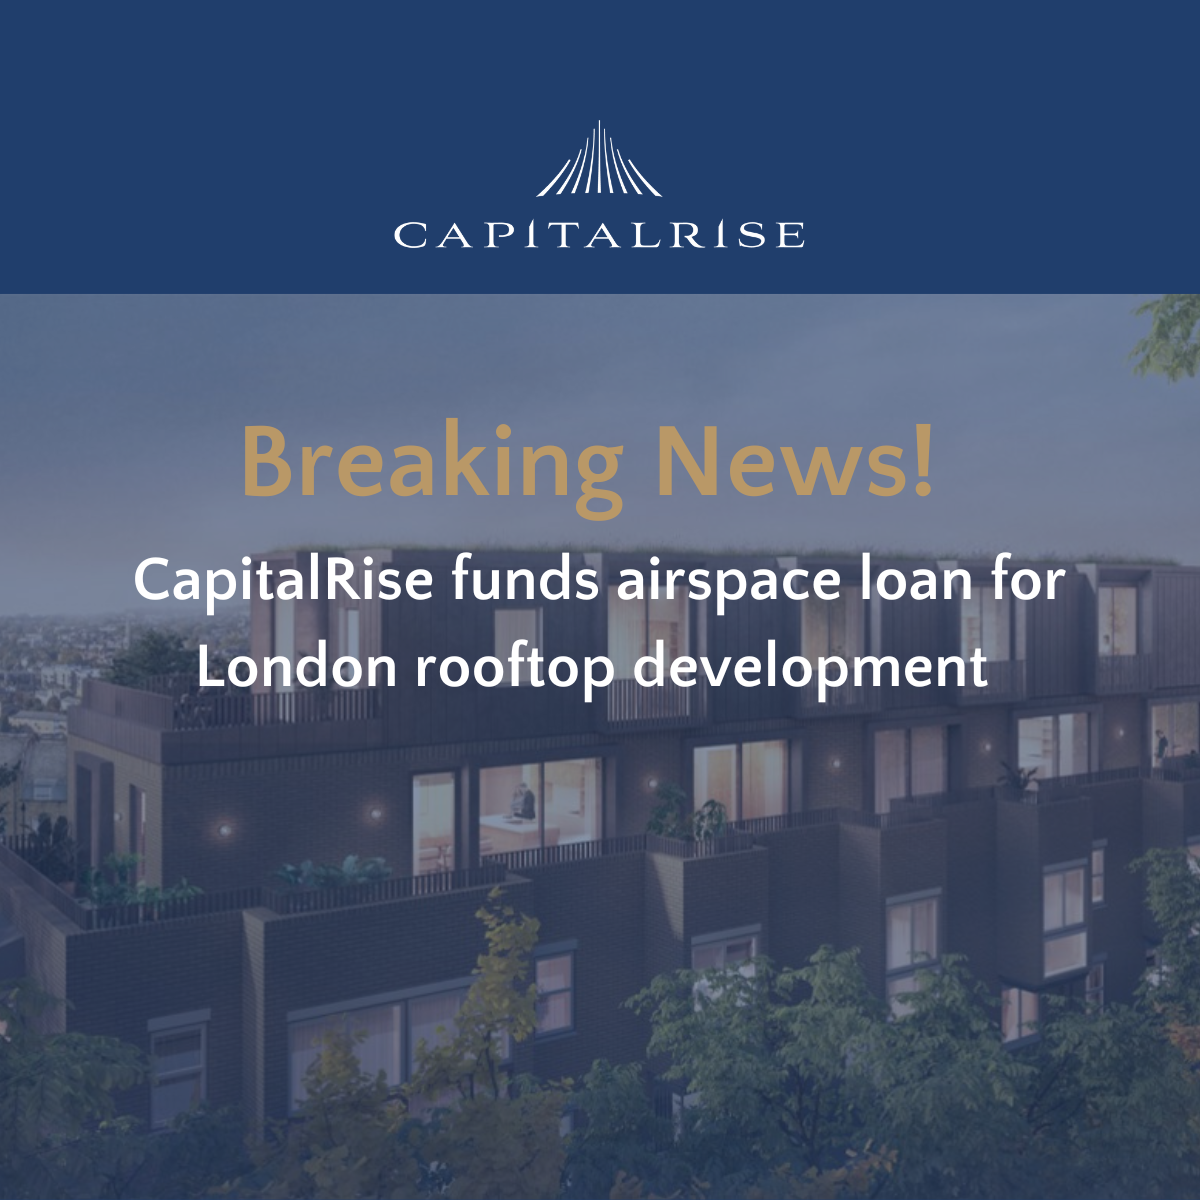 CapitalRise funds airspace loan for London rooftop development